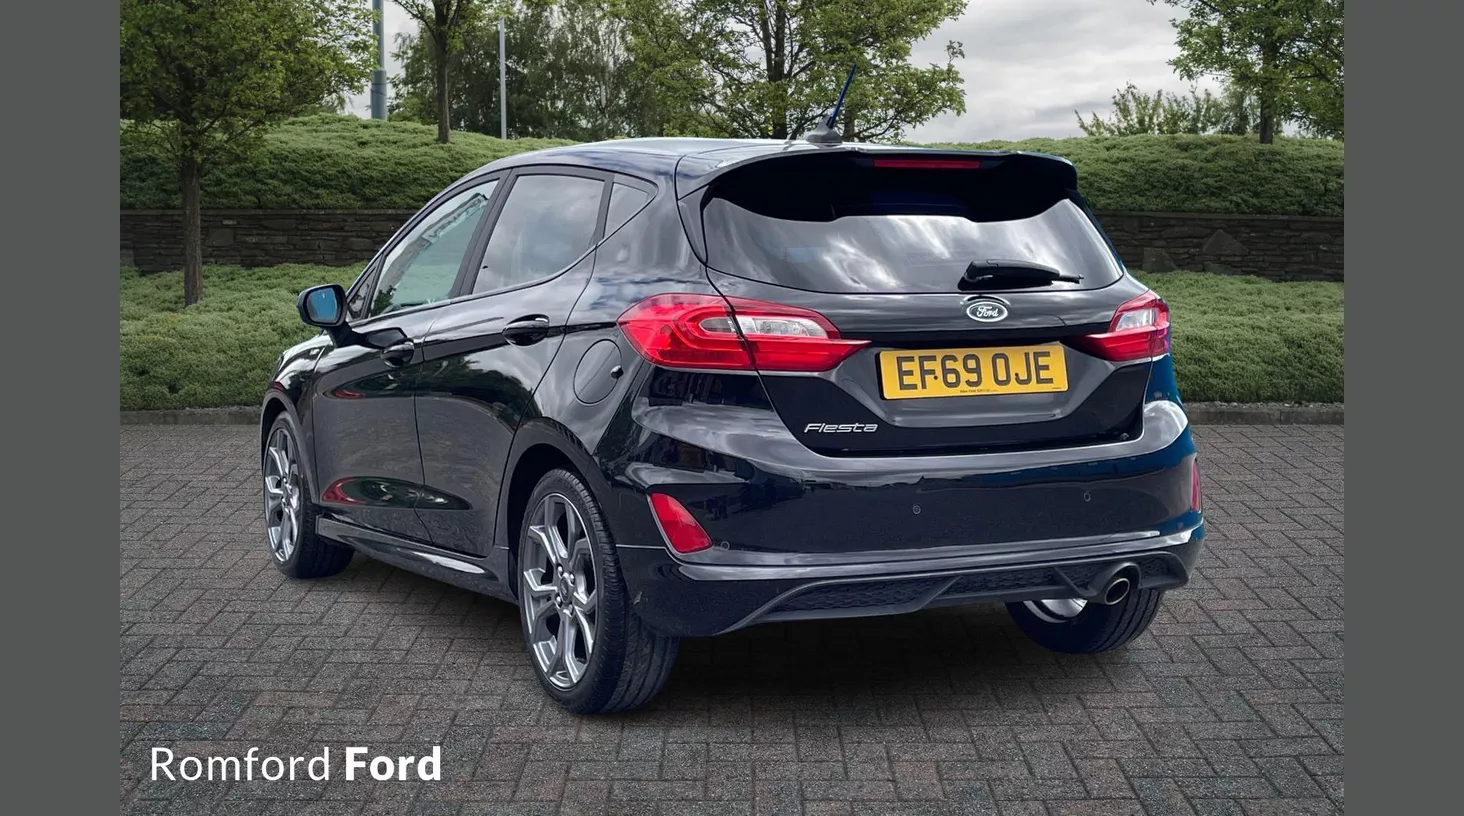 Ford Fiesta 1.0 EcoBoost 140 ST-Line Edition 5dr